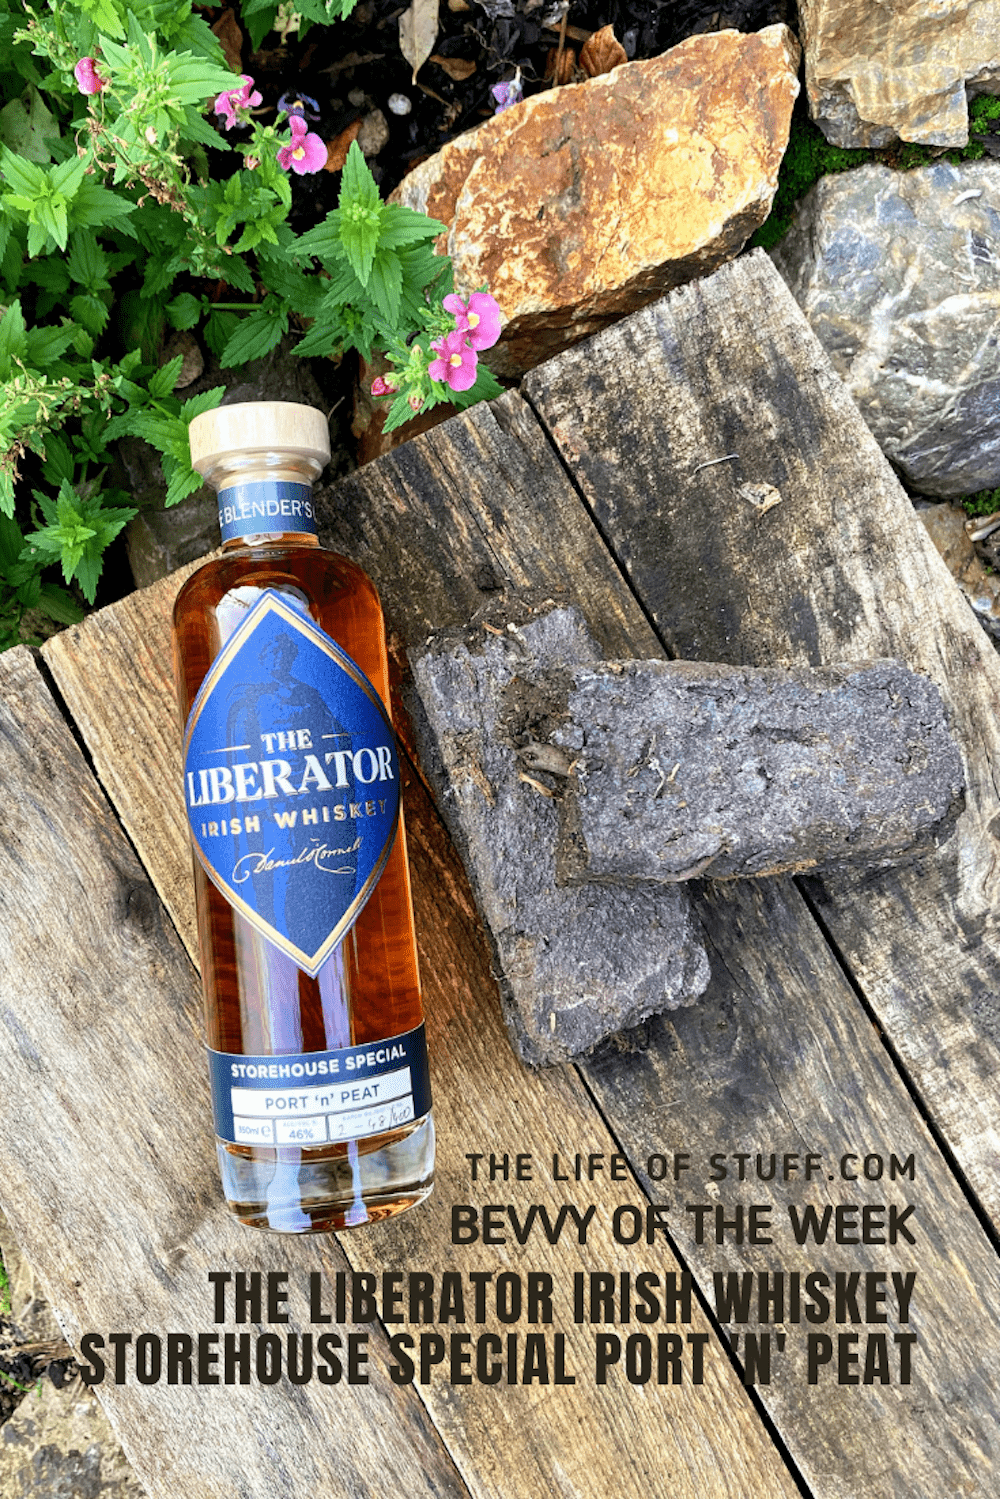 Bevvy of the Week - The Liberator Irish Whiskey Storehouse Special Port N Peat - The Life of Stuff